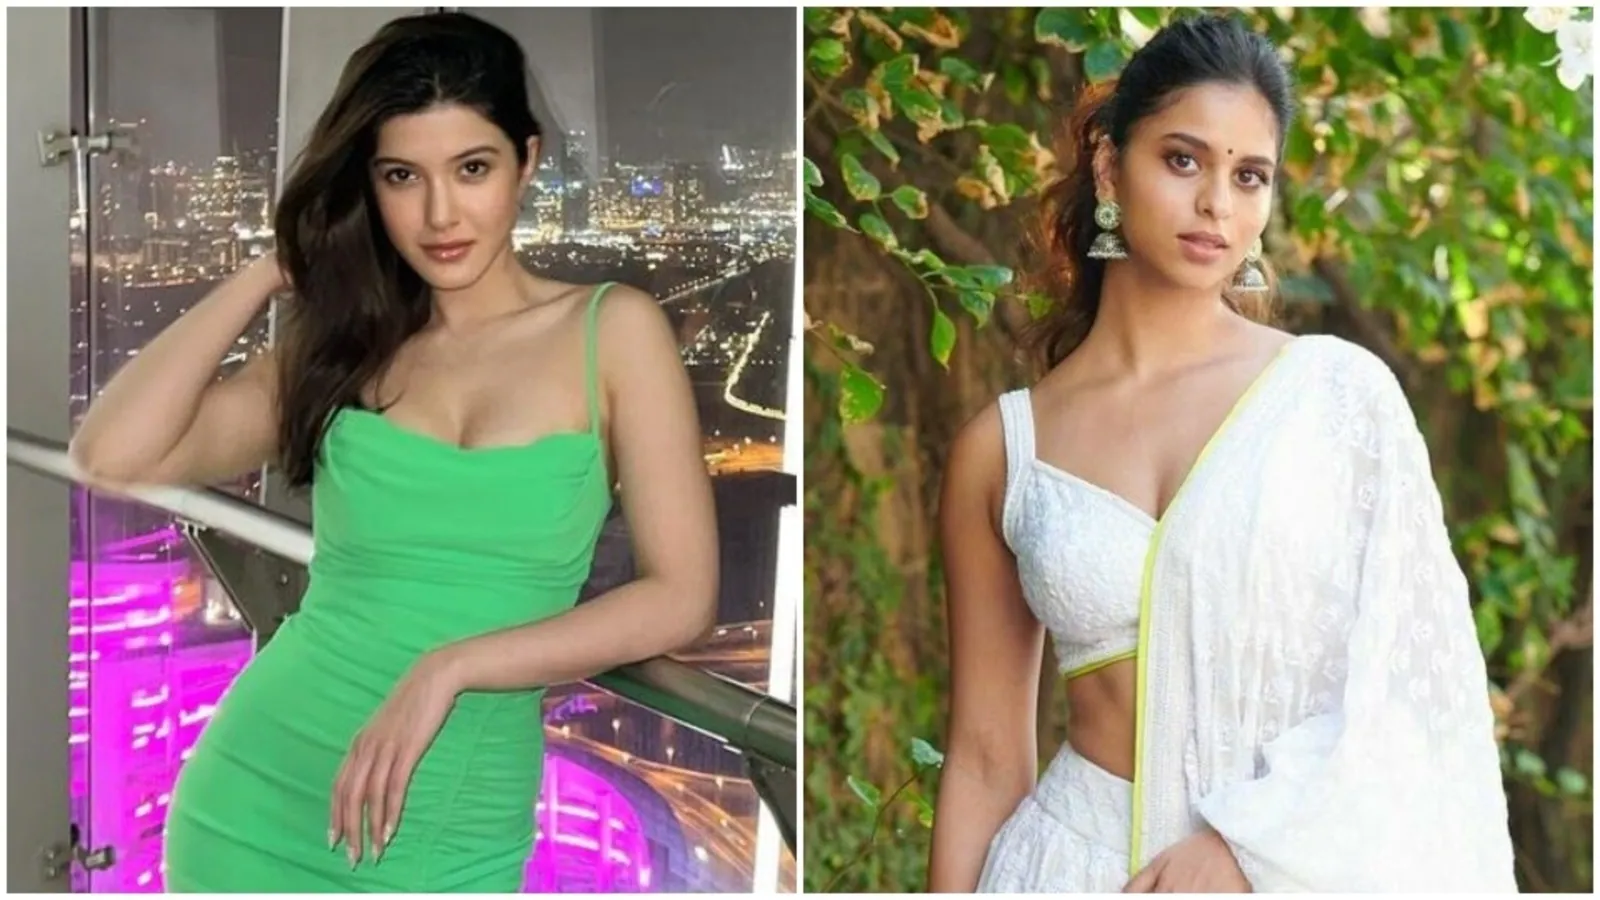 Shanaya Kapoor’s pics in green slip dress sets Internet on fire, gets compliment from Suhana Khan. It costs ₹4k